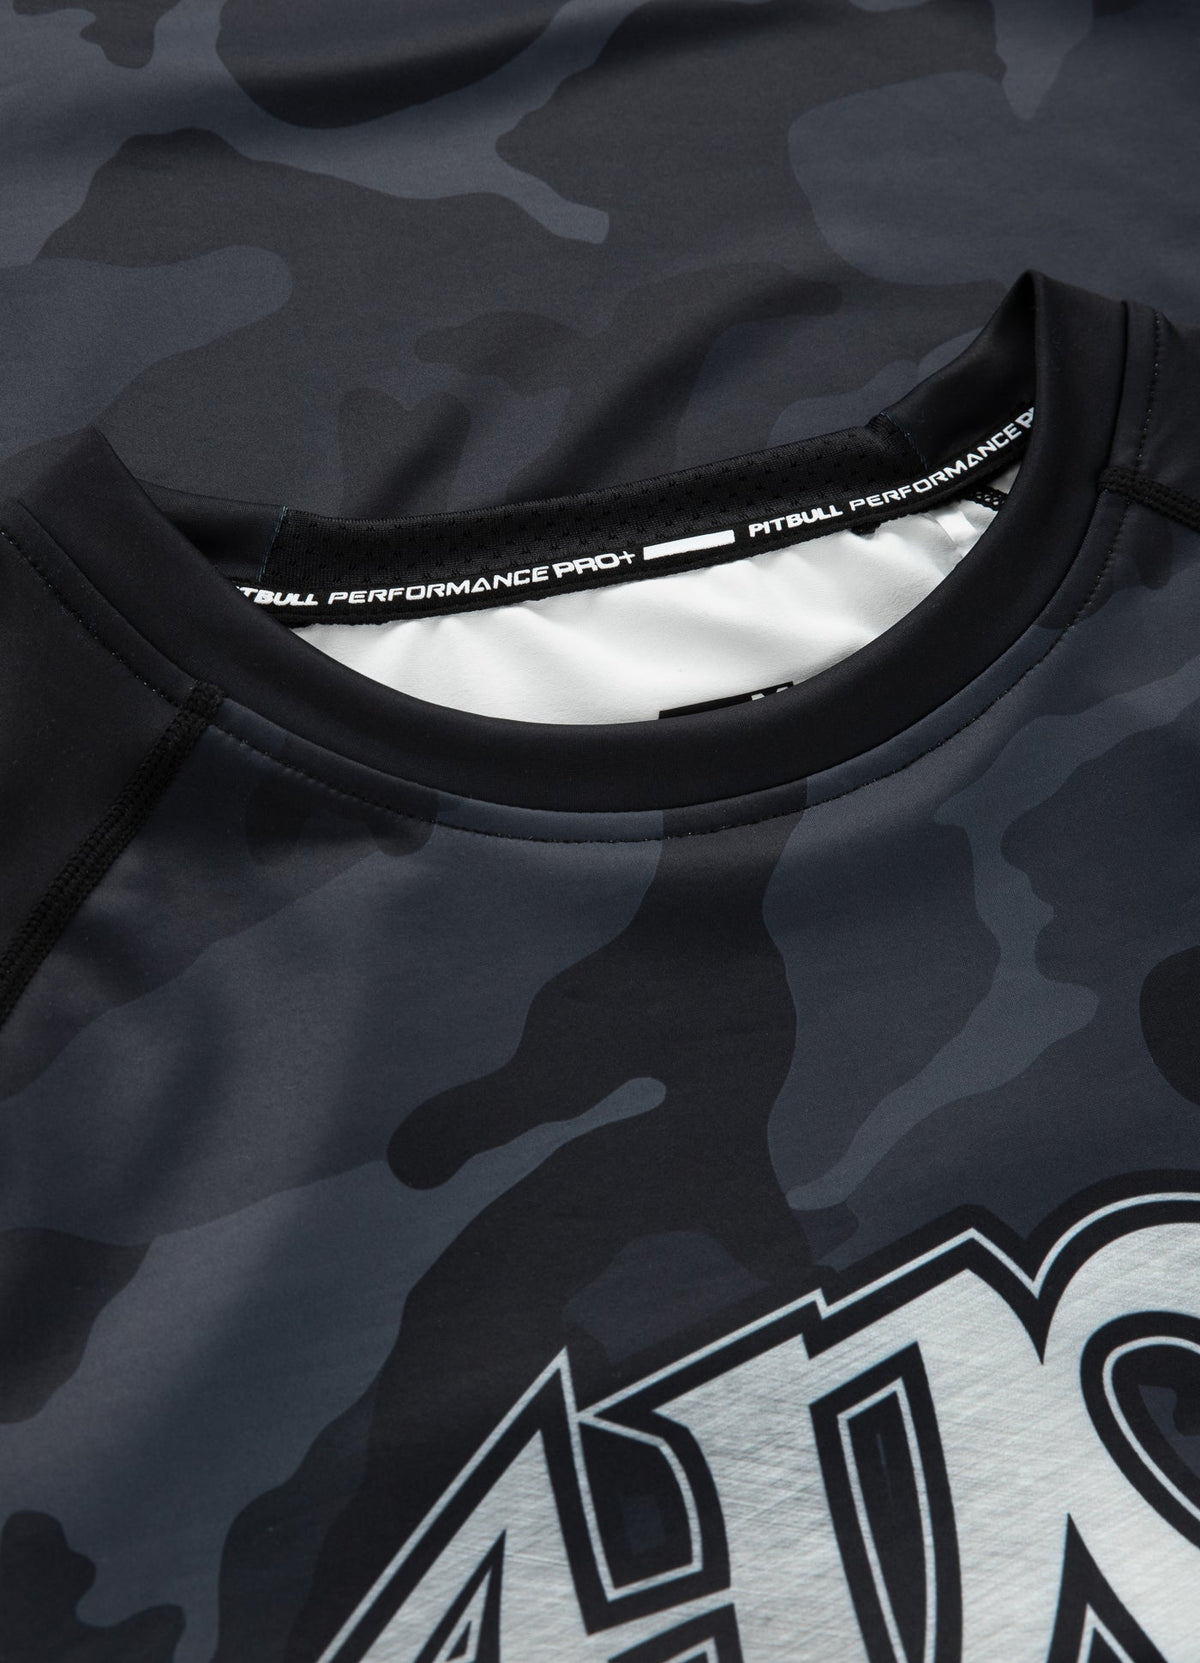 ADCC fitted  All Black Camo Rash Guard